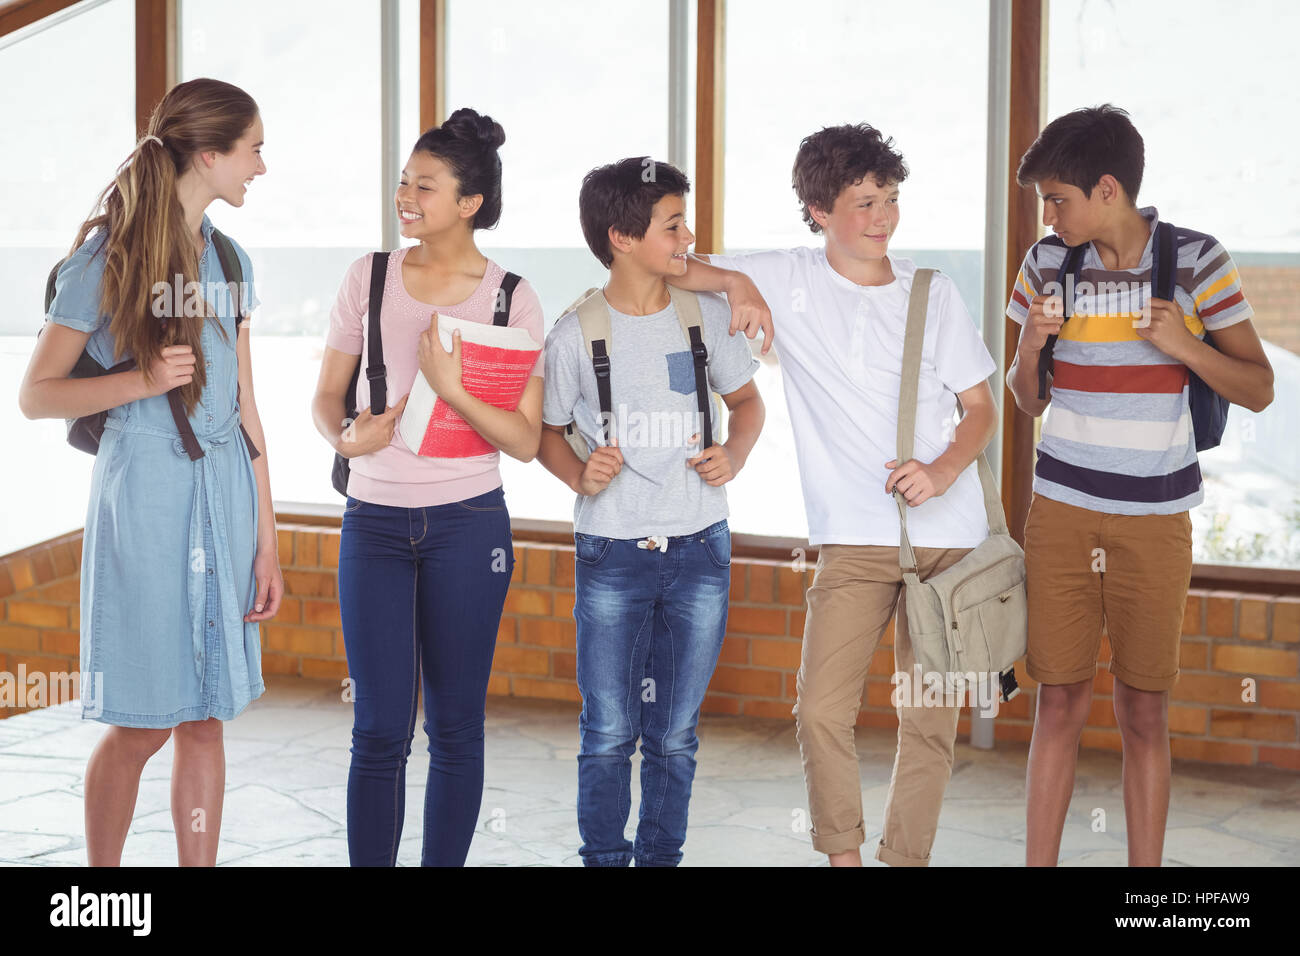 Happy students interacting with each other in corridor at school Stock Photo